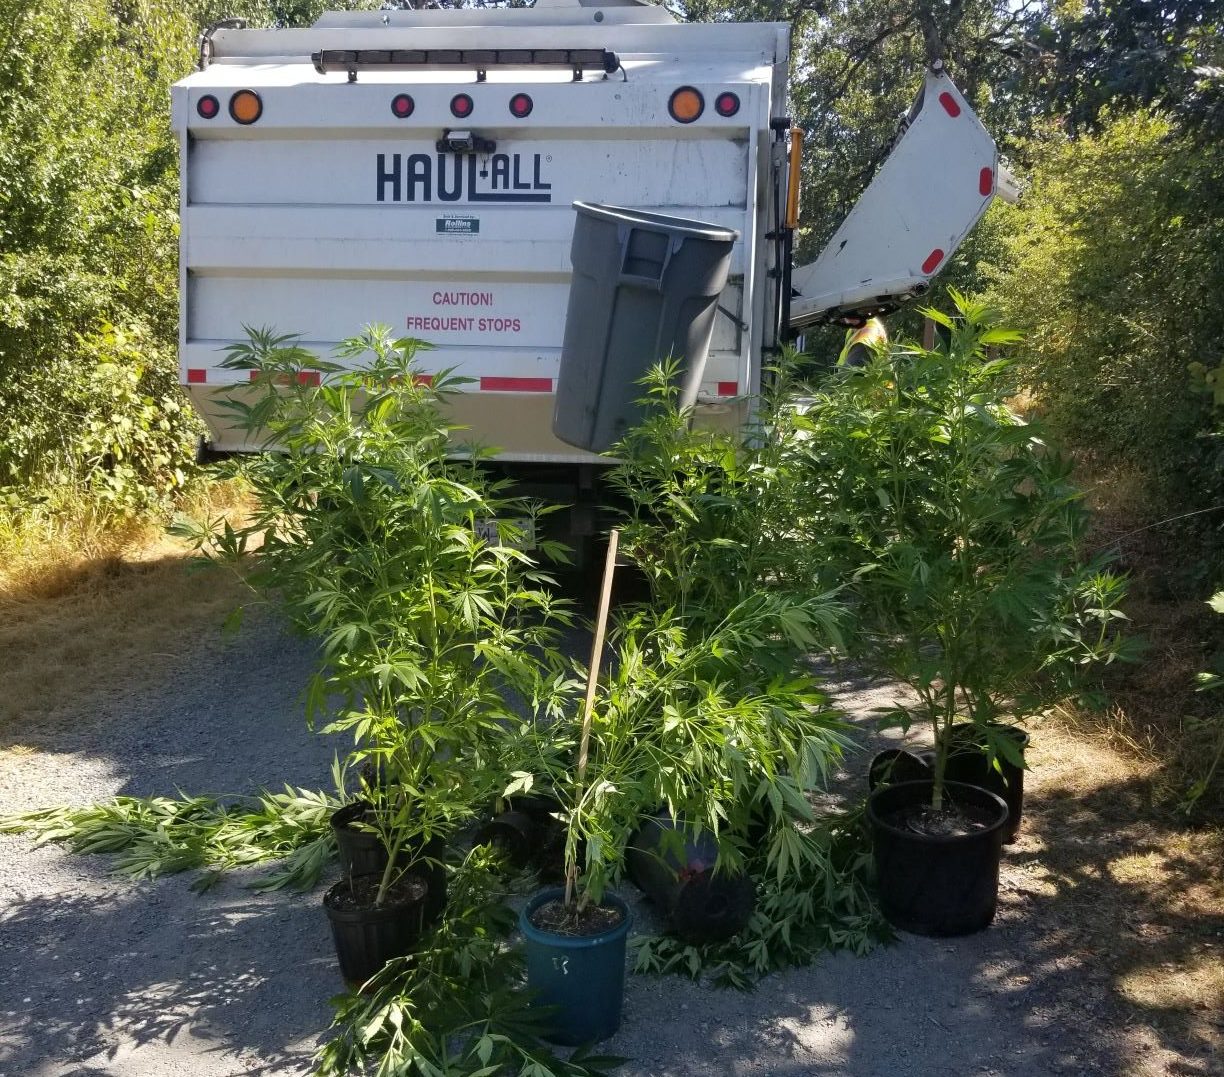 Kids discover 18 cannabis plants while on a hike in Saanich, BC